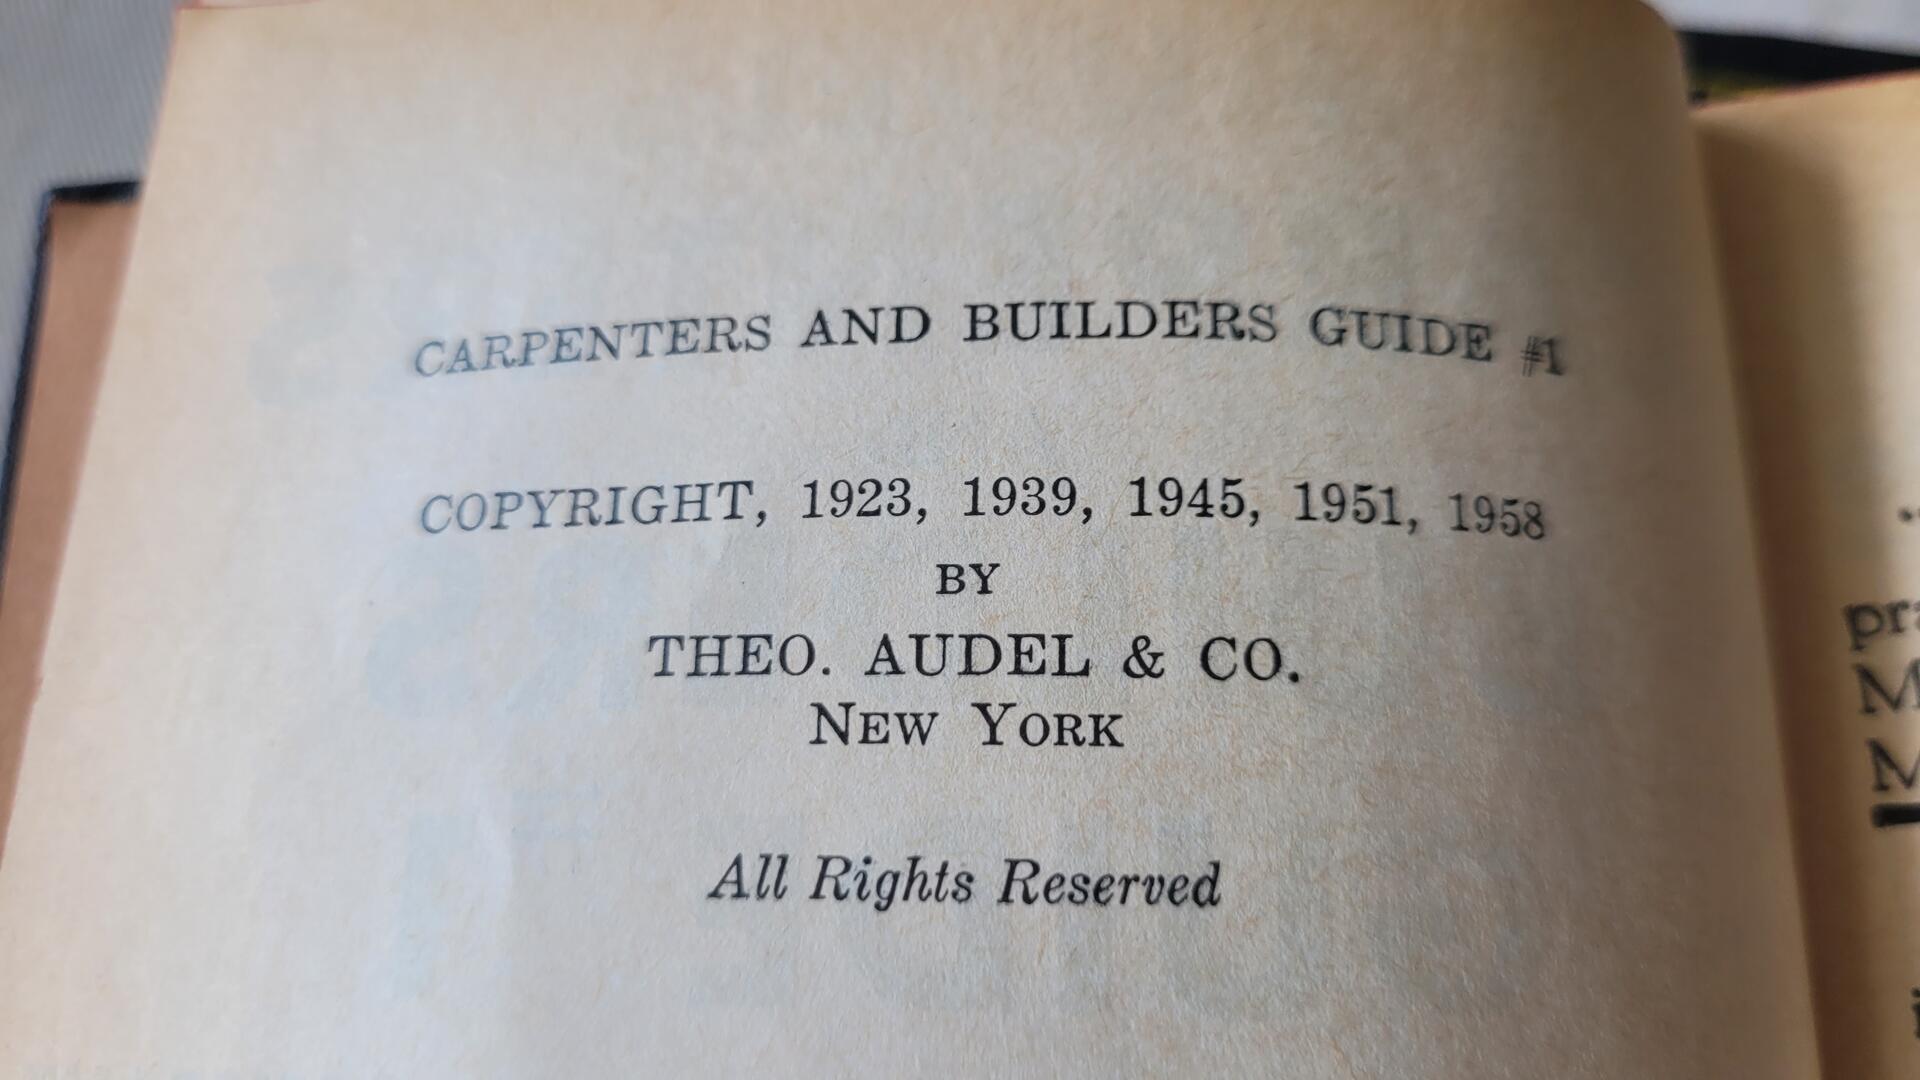 Audels Carpenters and Builders Guide Vol. 1,2,3 Published by Theo Audel & Co., New York 1958. Vintage 3 Book Set legendary in the woodworking trade